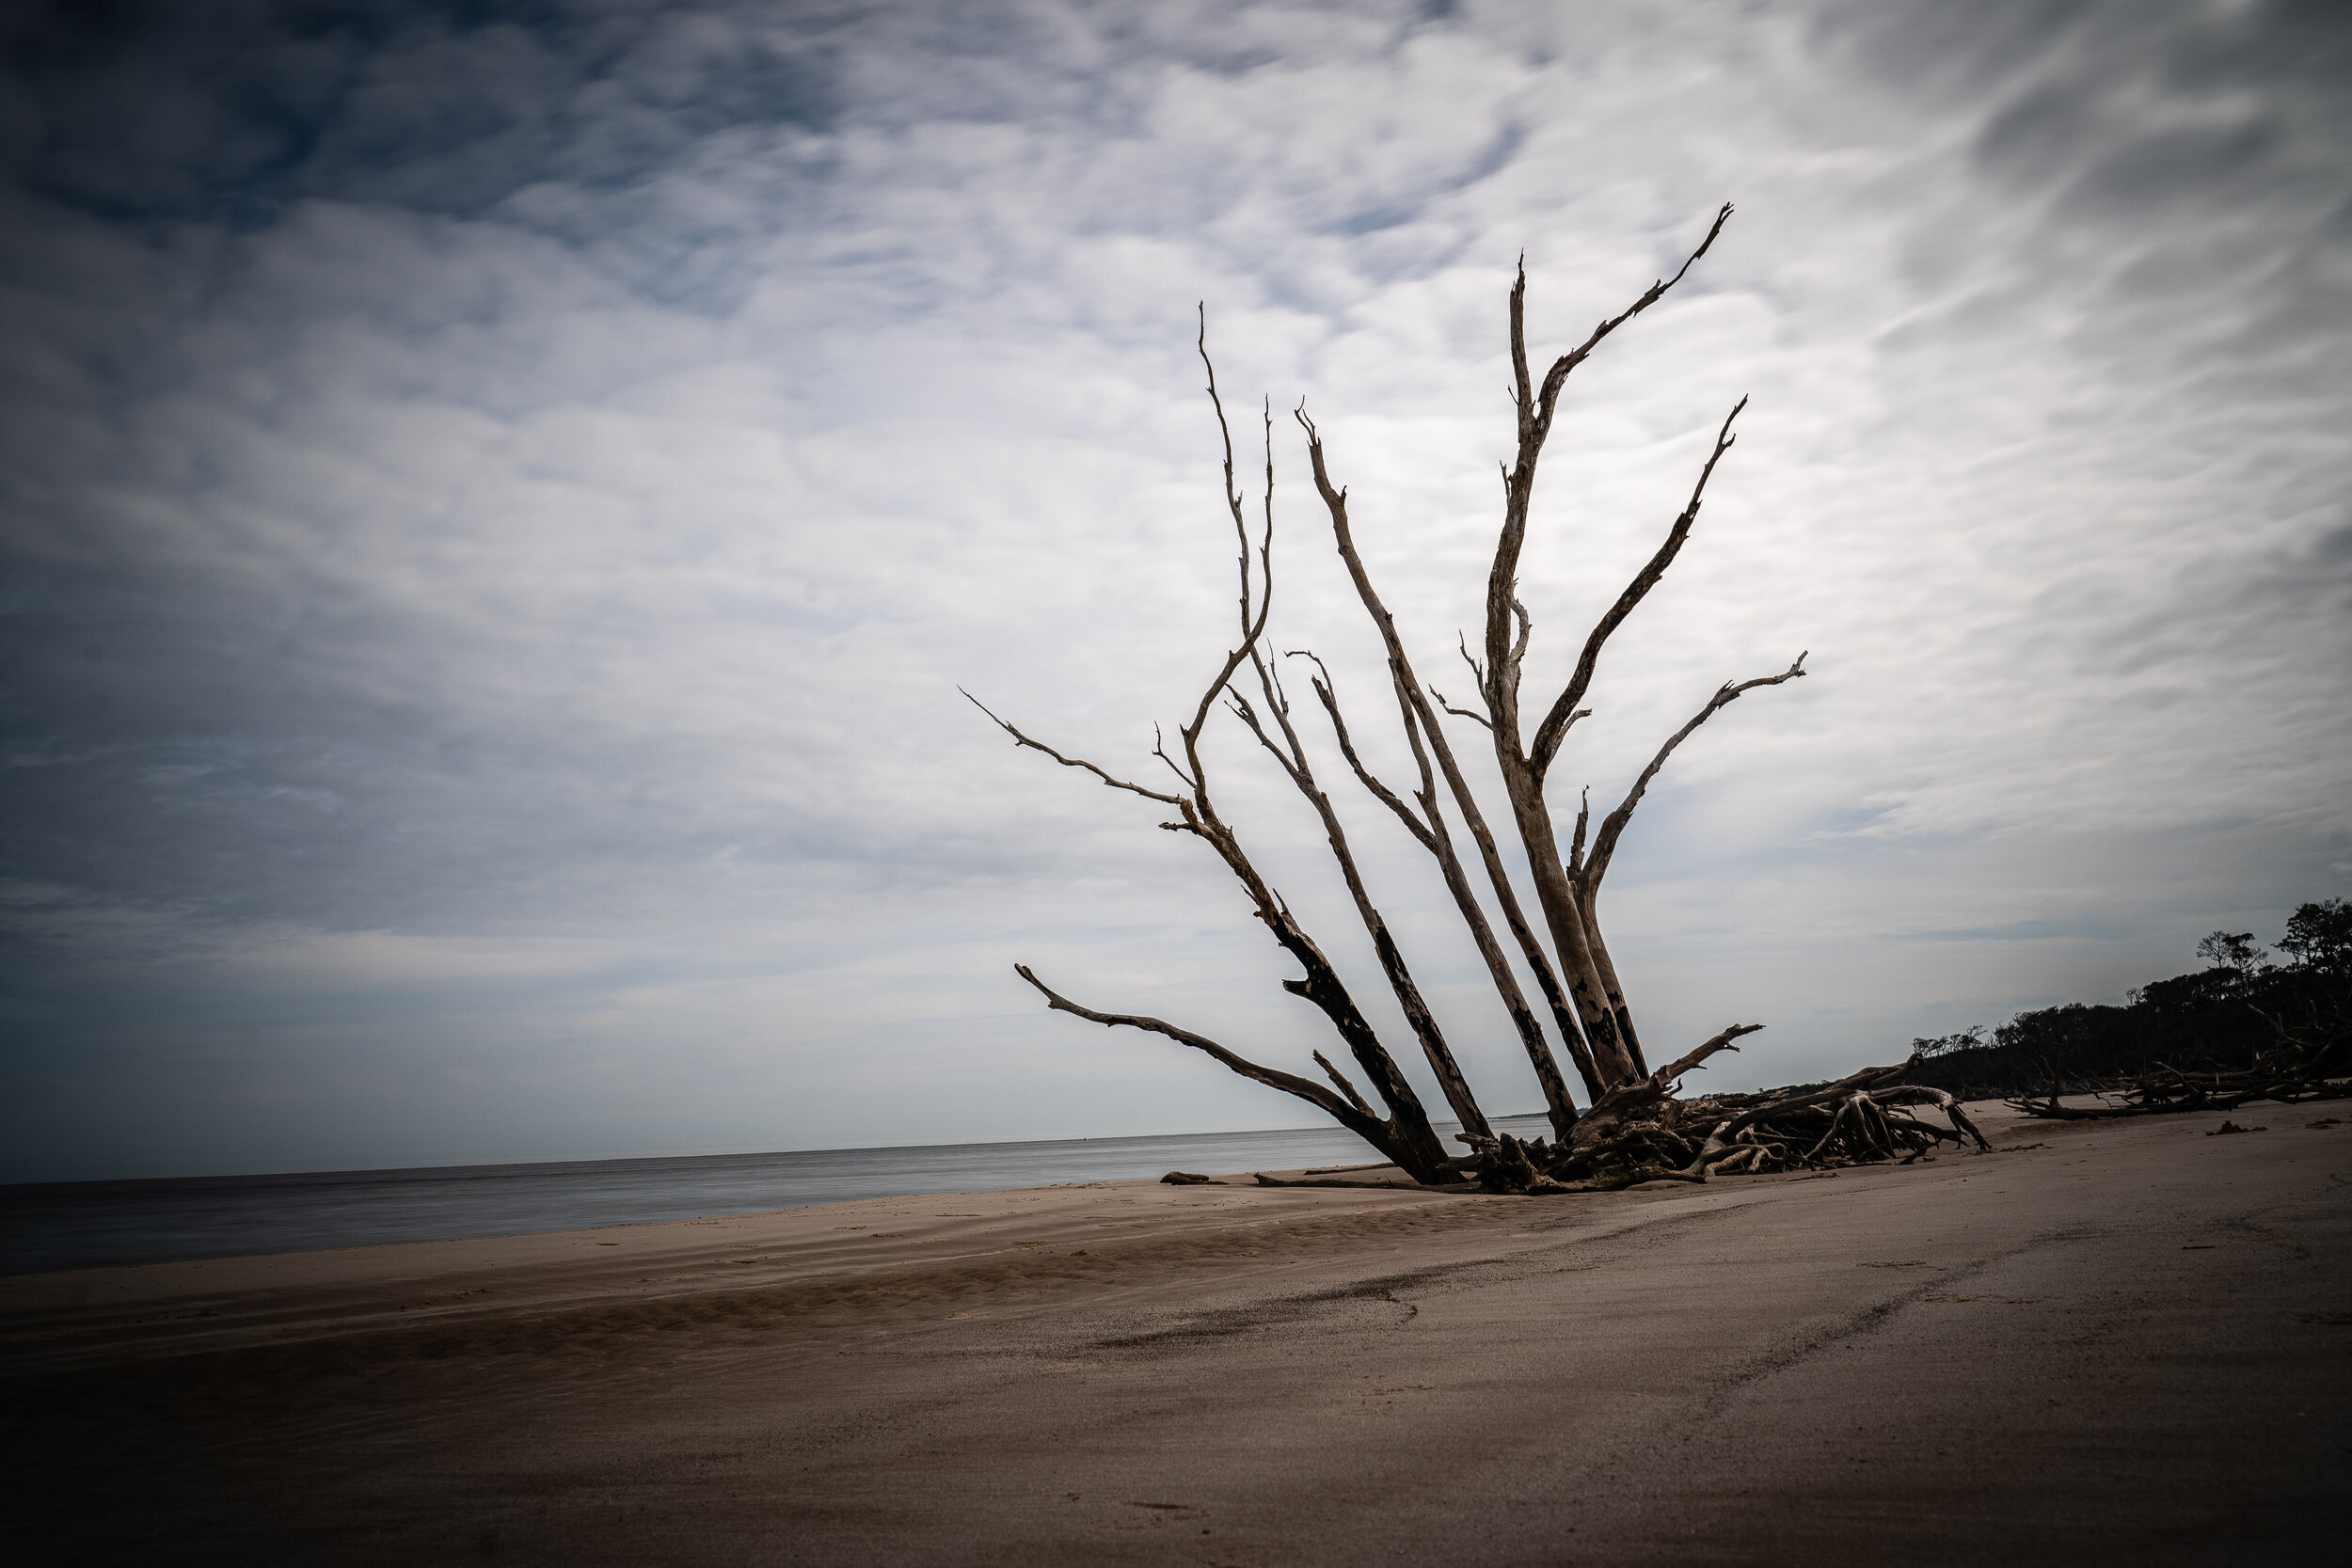  Big Talbot Island beach  in the Timucuan Ecological and Historical Preserve. This beach had beautiful driftwood.  